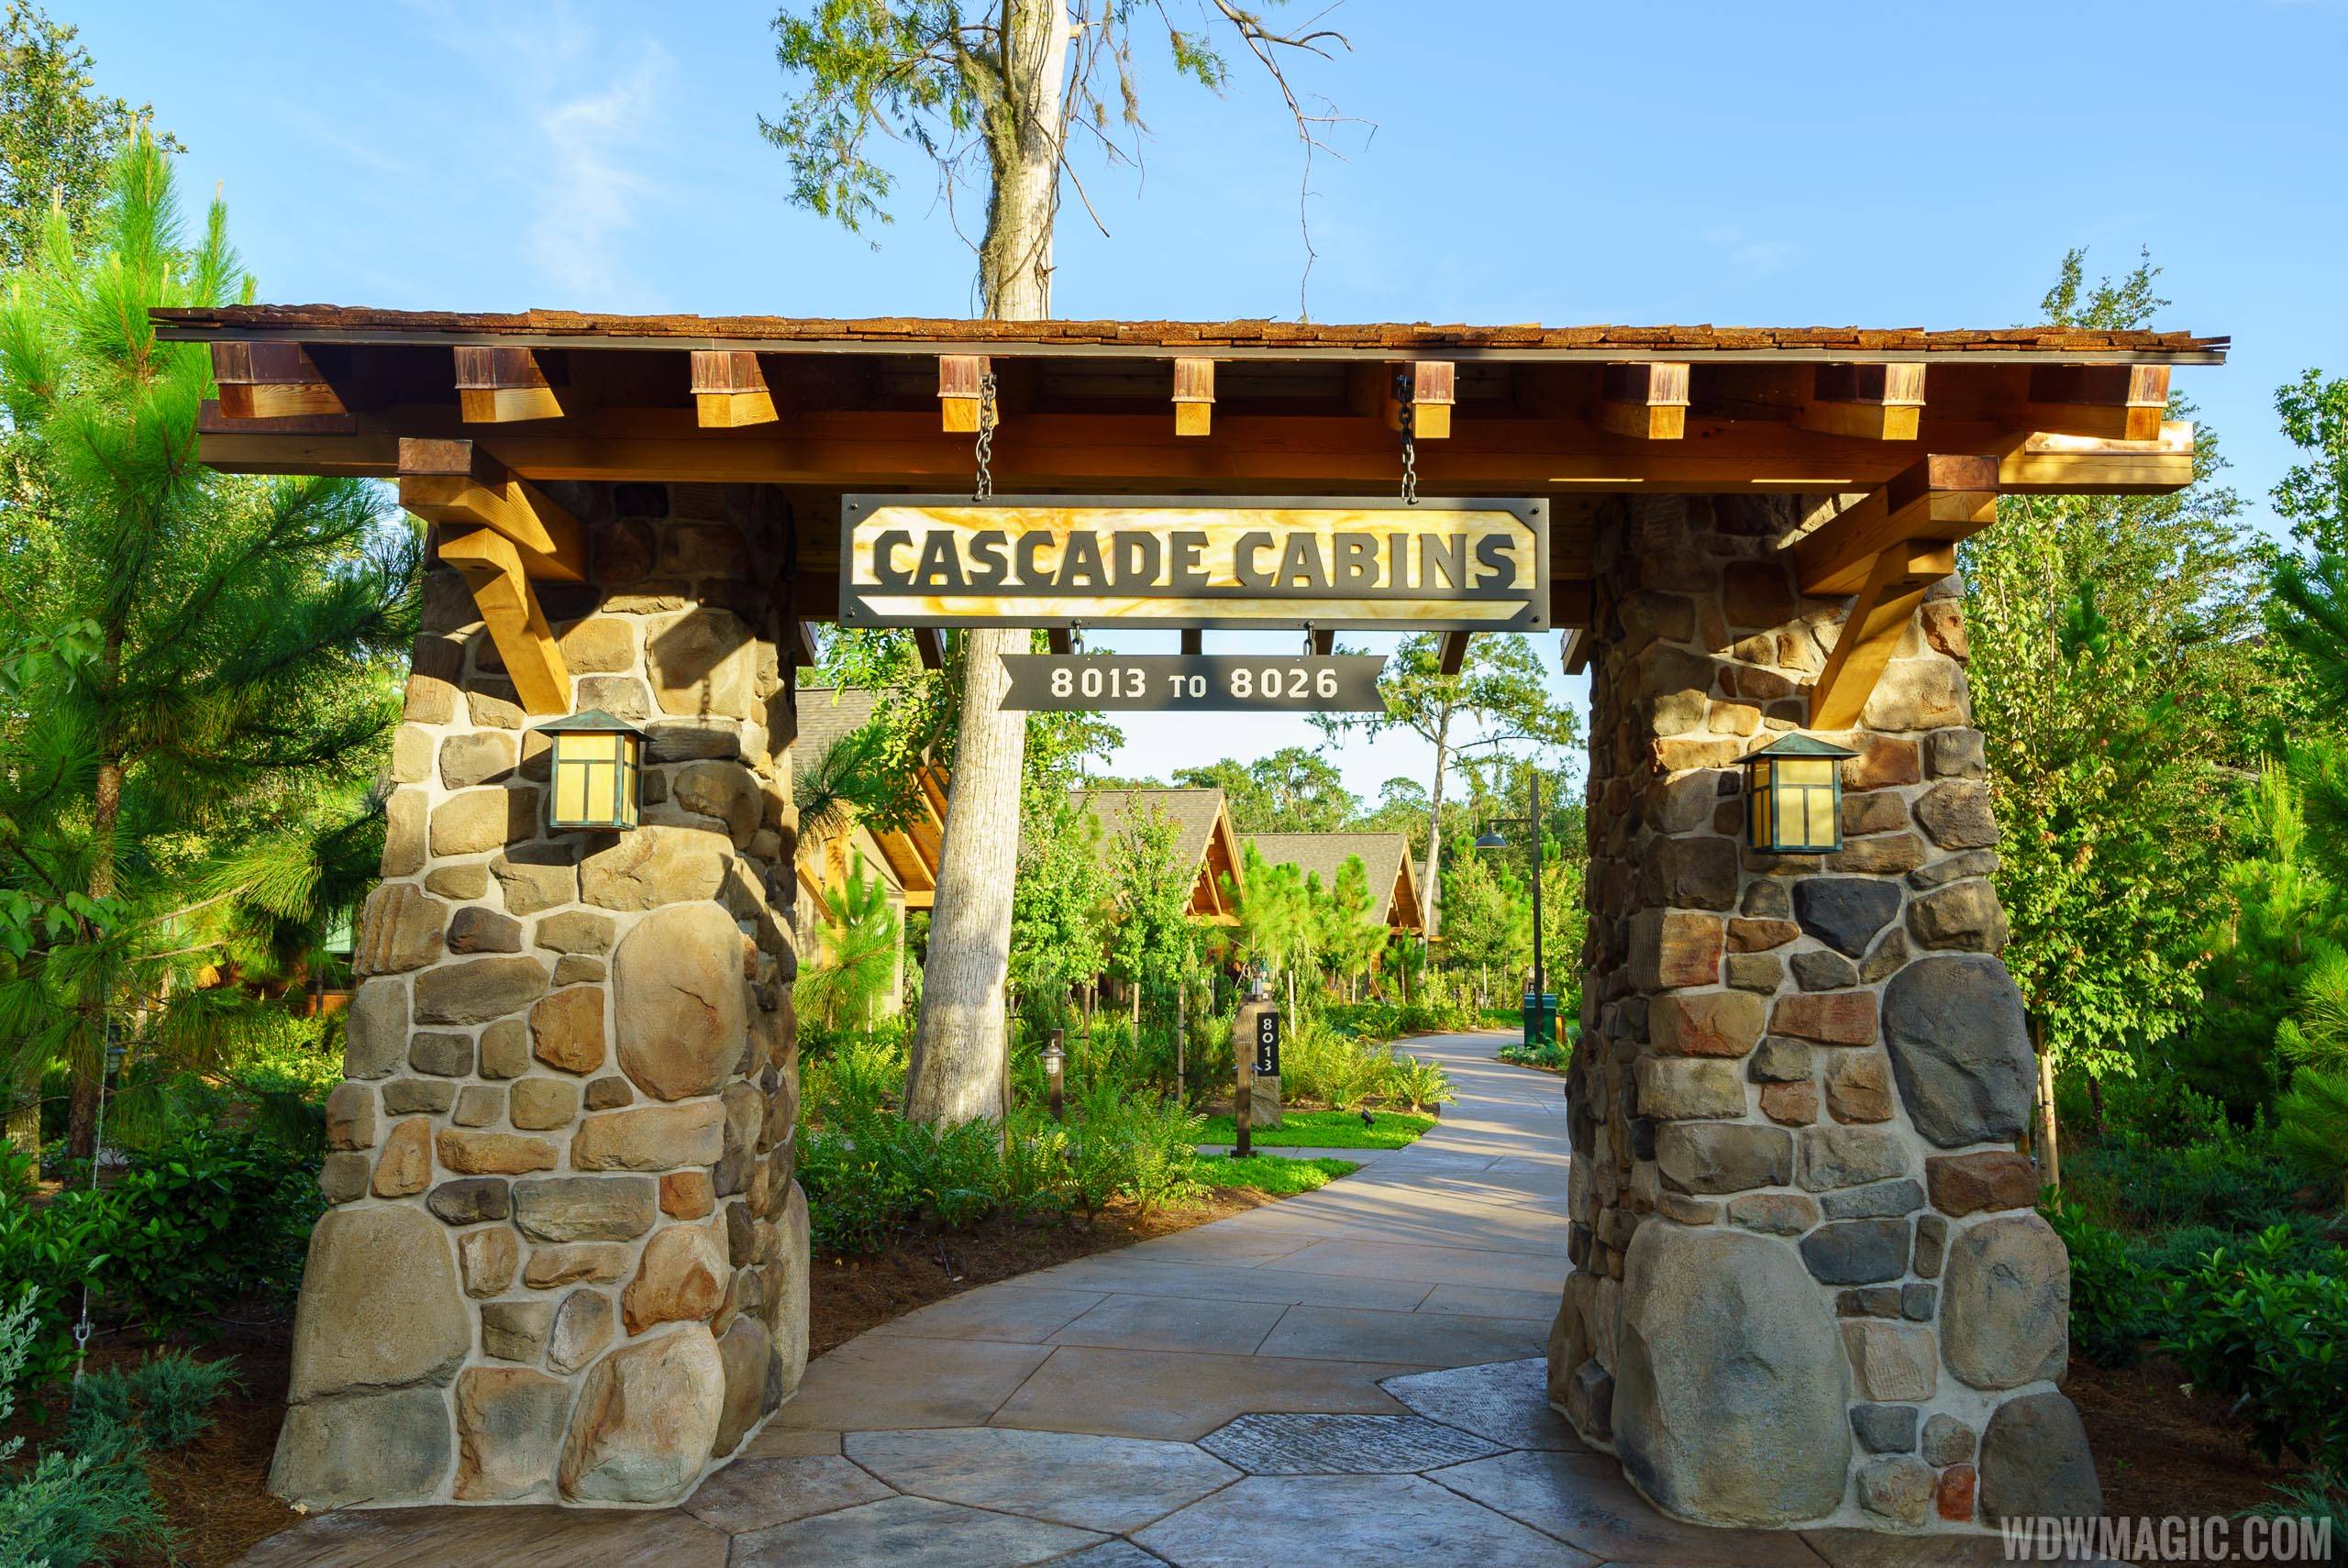 Tour of Copper Creek Villas and Cabins at Disney's Wilderness Lodge